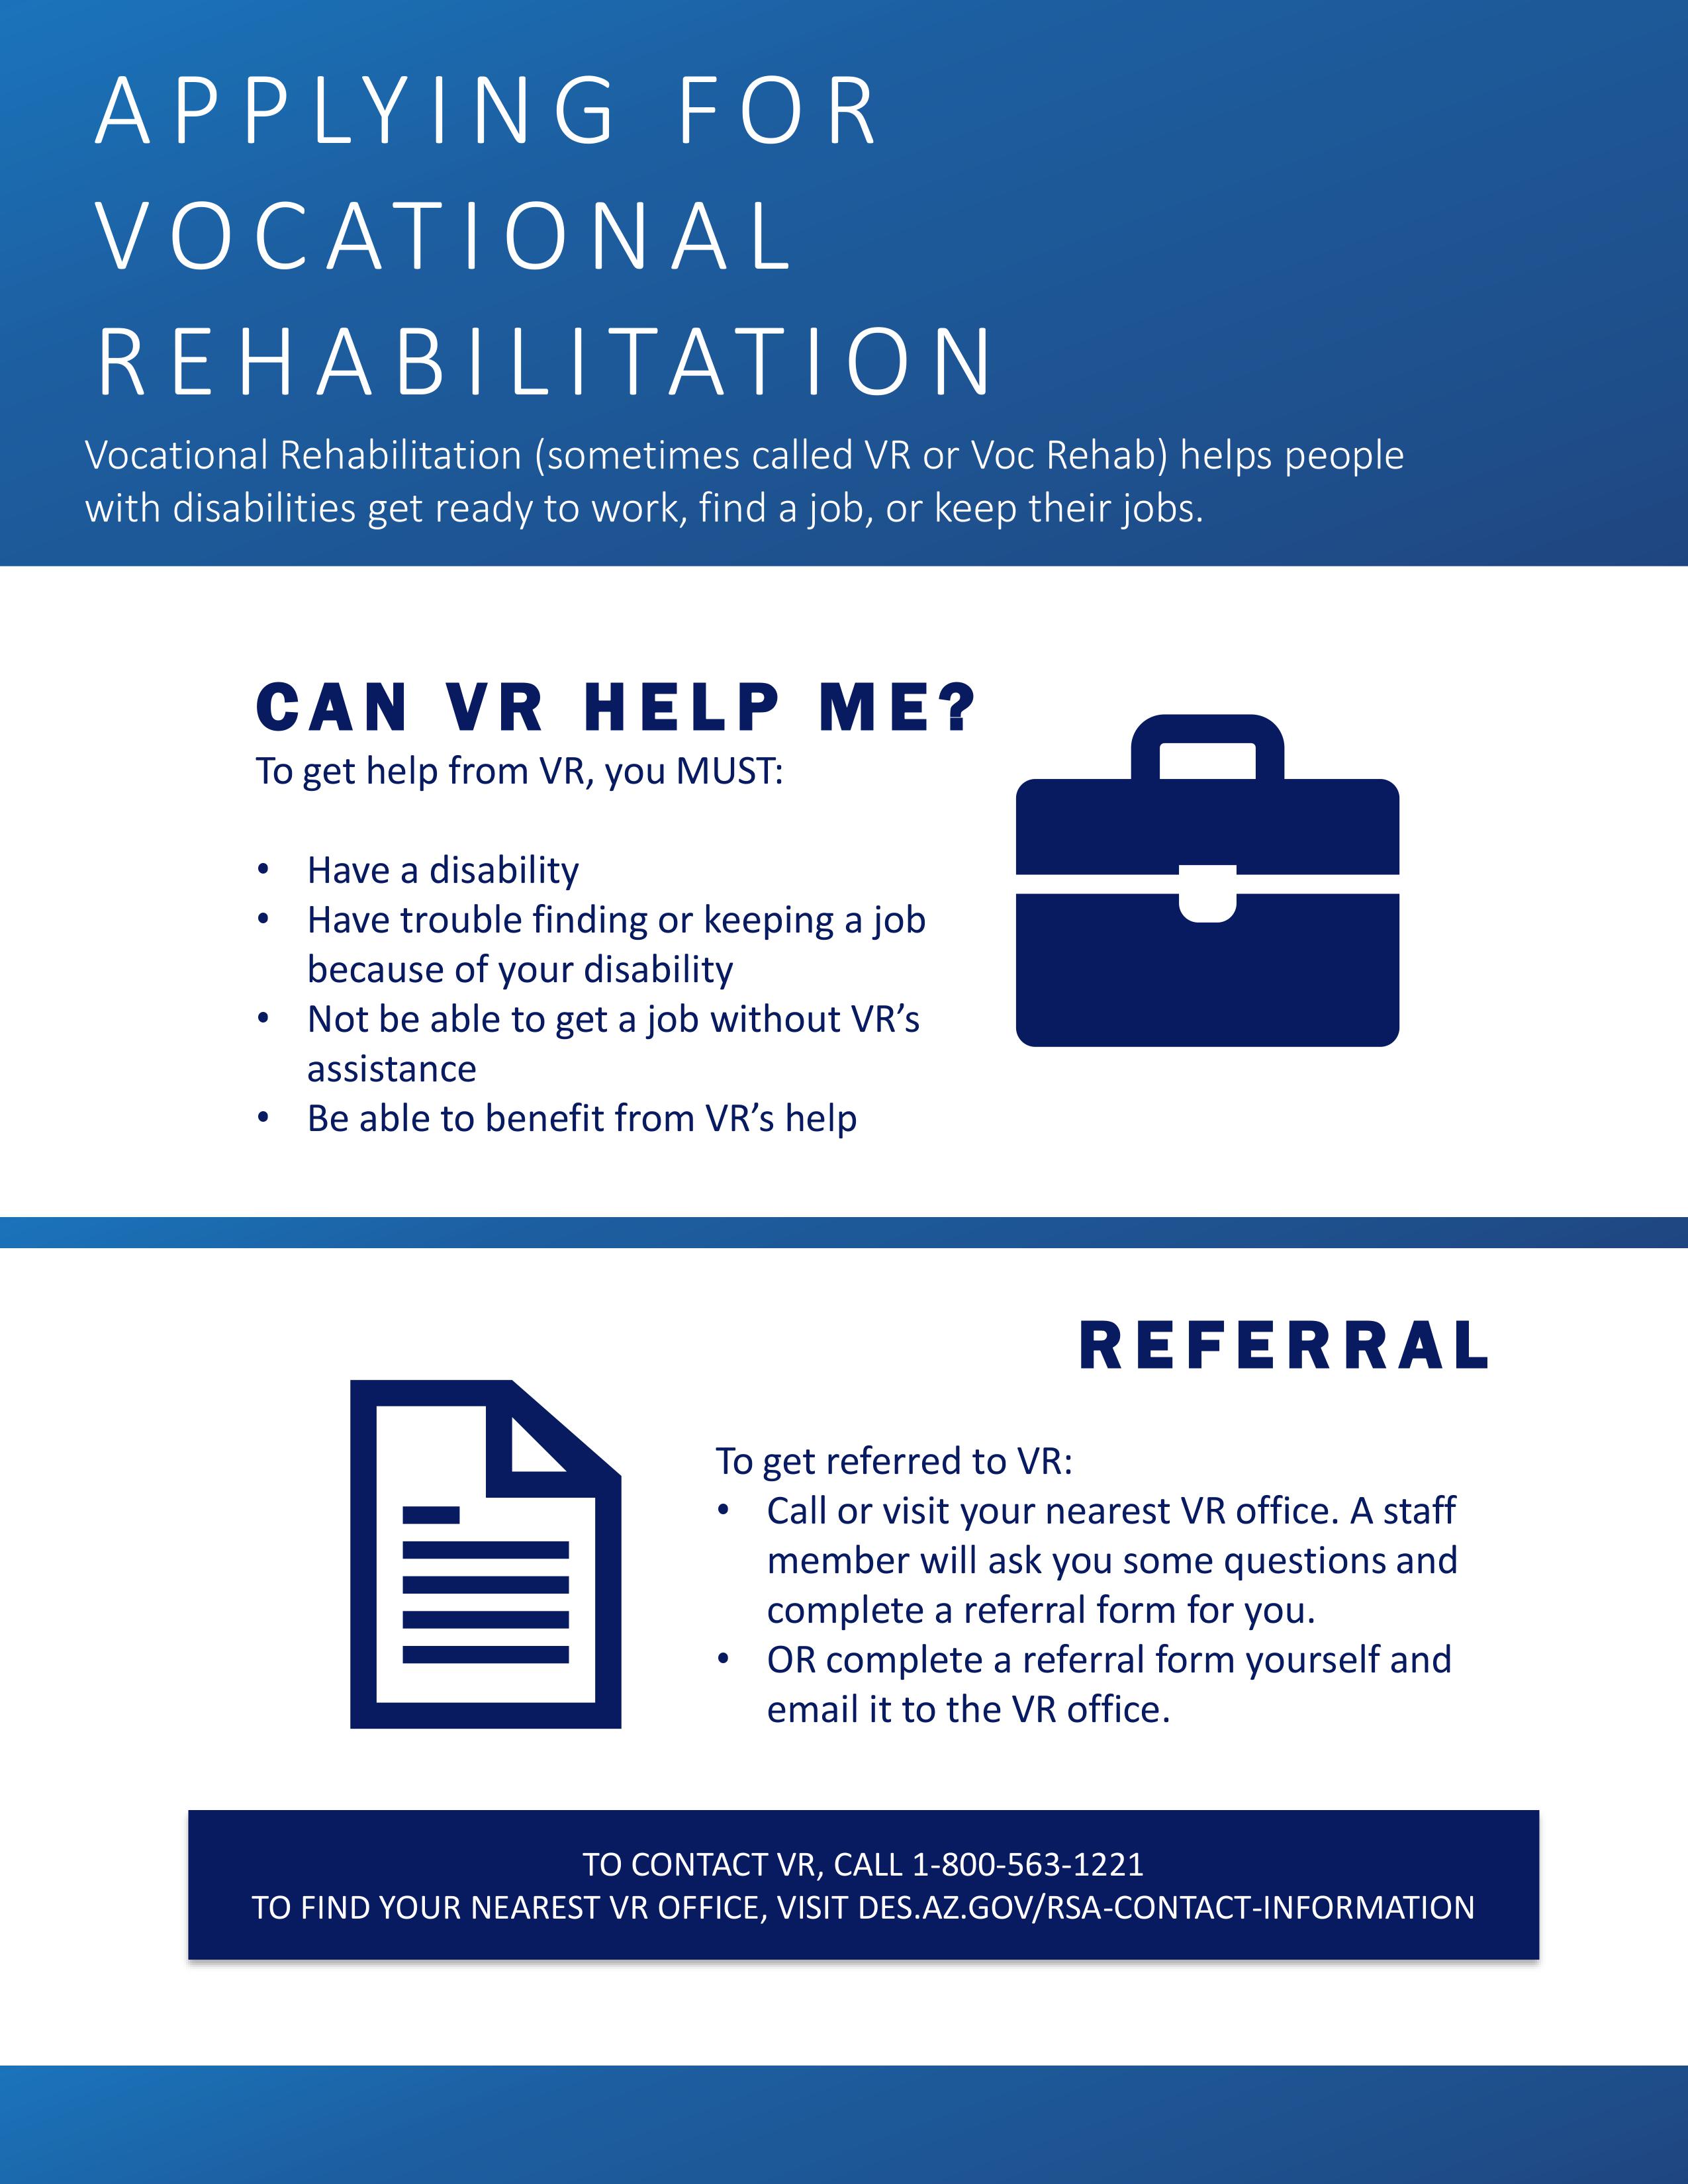 VR Eligibility and Referral Image